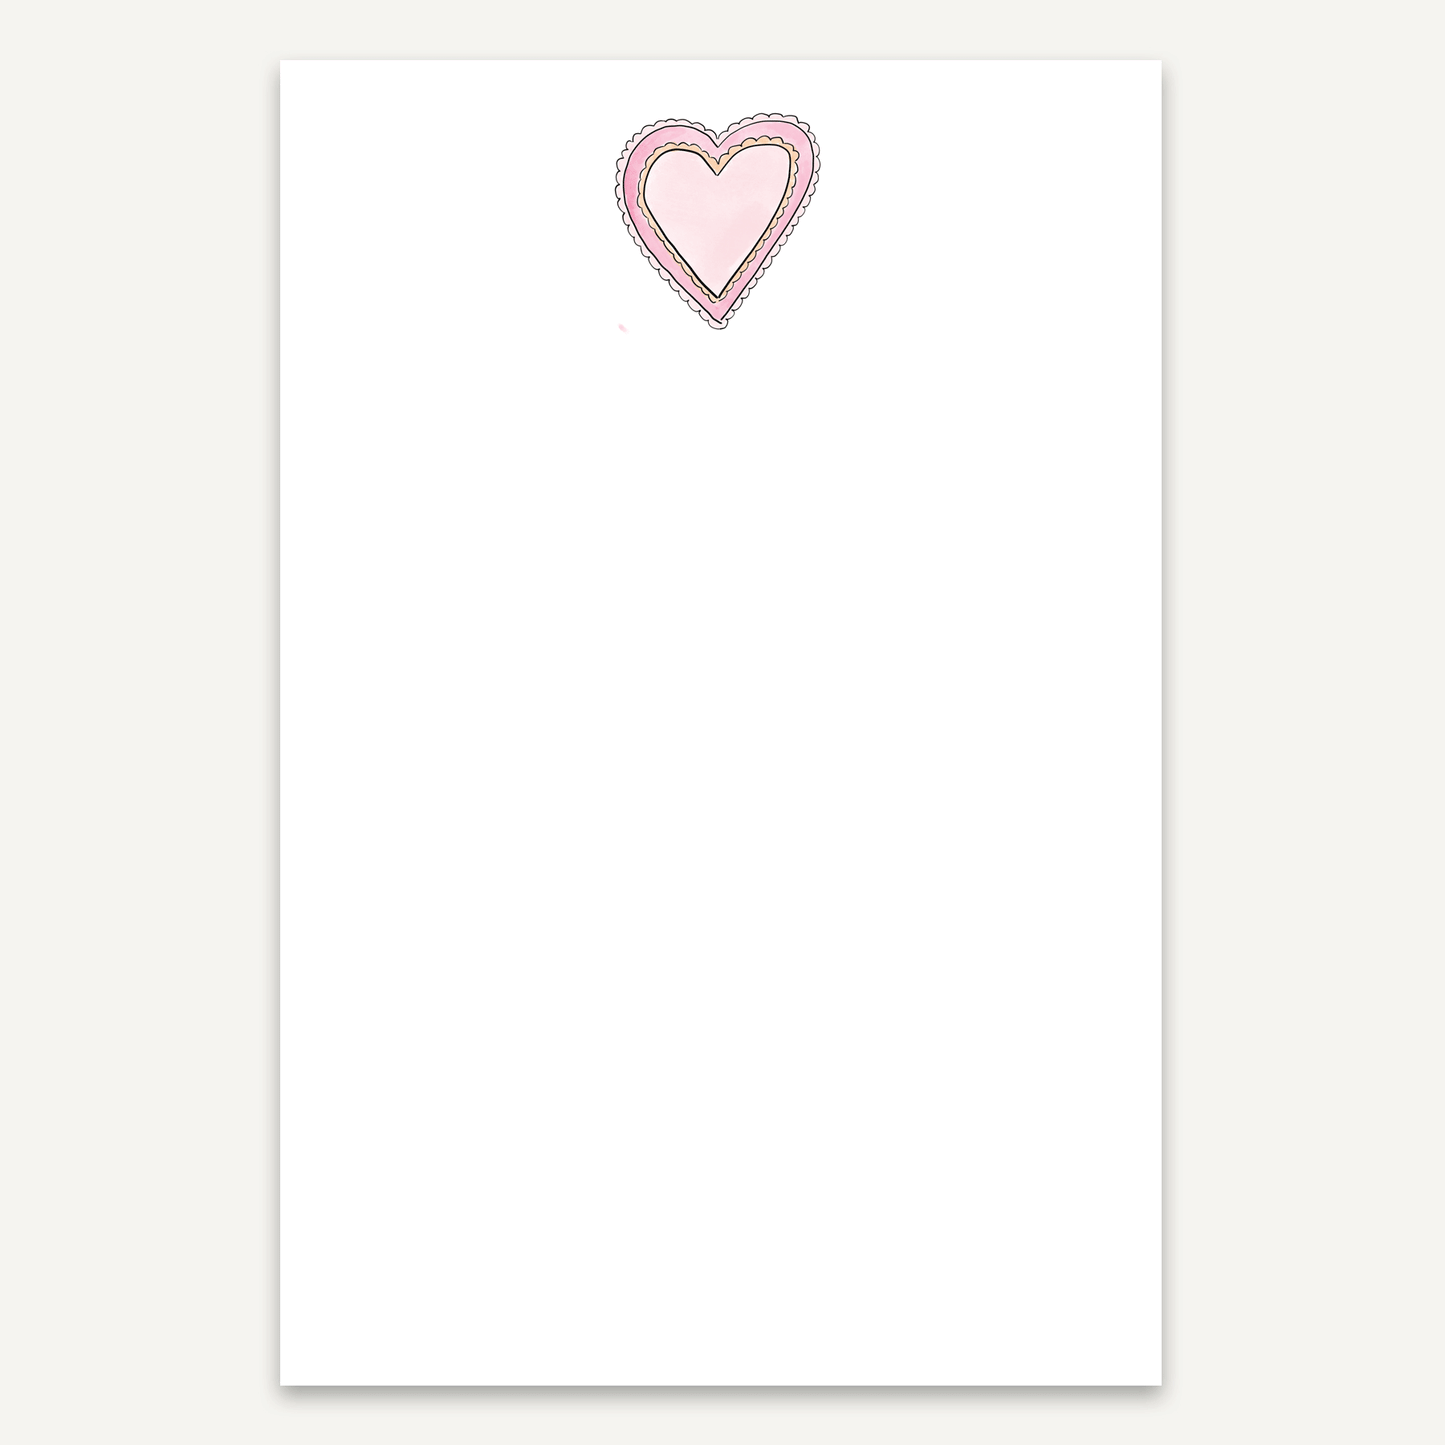 Scalloped Heart Note Pad